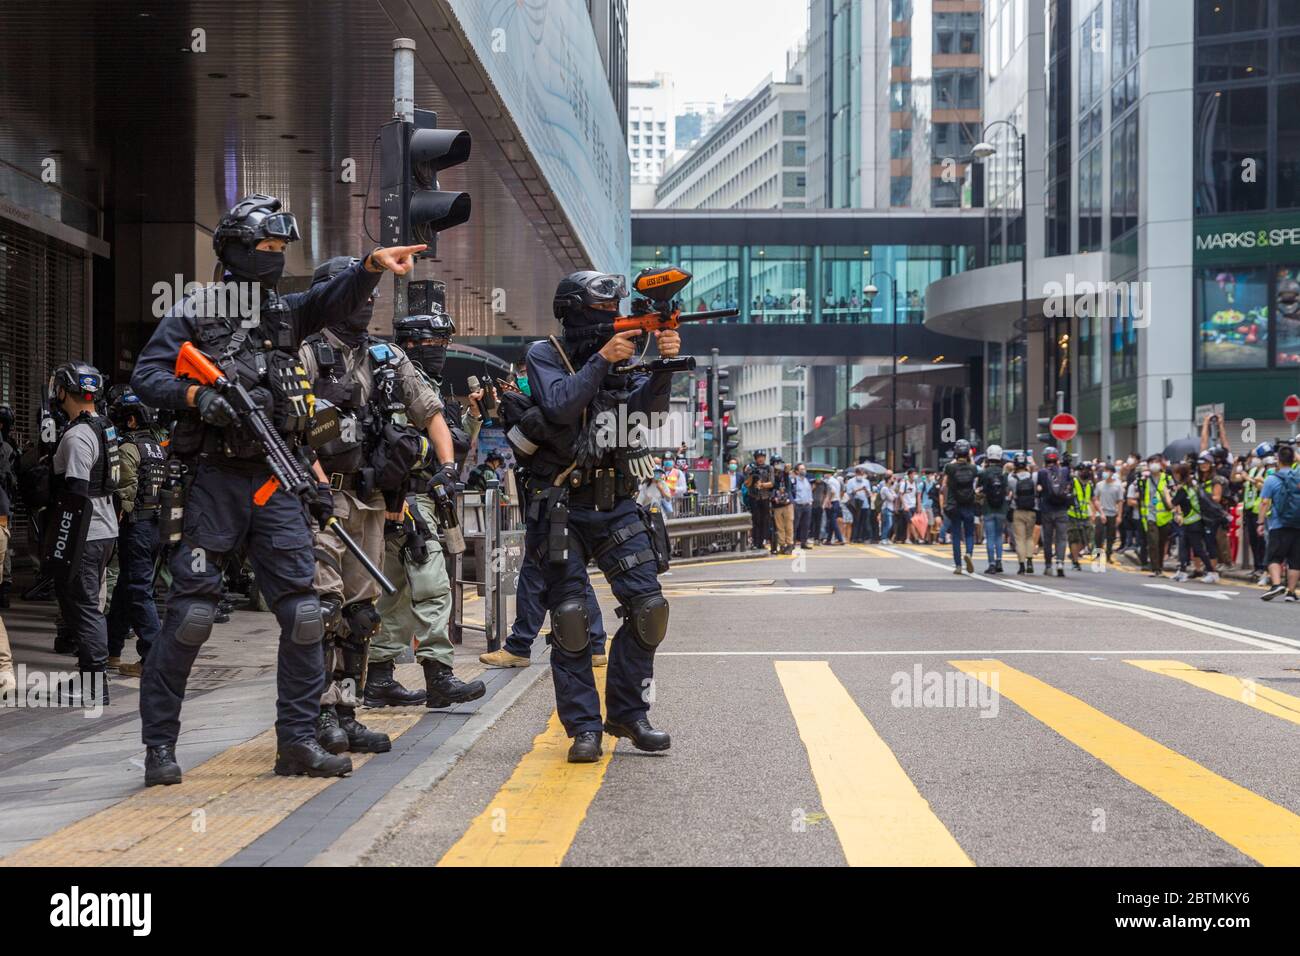 Central, Hong Kong. 27 May, 2020 Hong Kong Protest Anti-National Anthem Law. Police officer preparing to fire pepper balls into the crowd. Credit: David Ogg / Alamy Live News Stock Photo